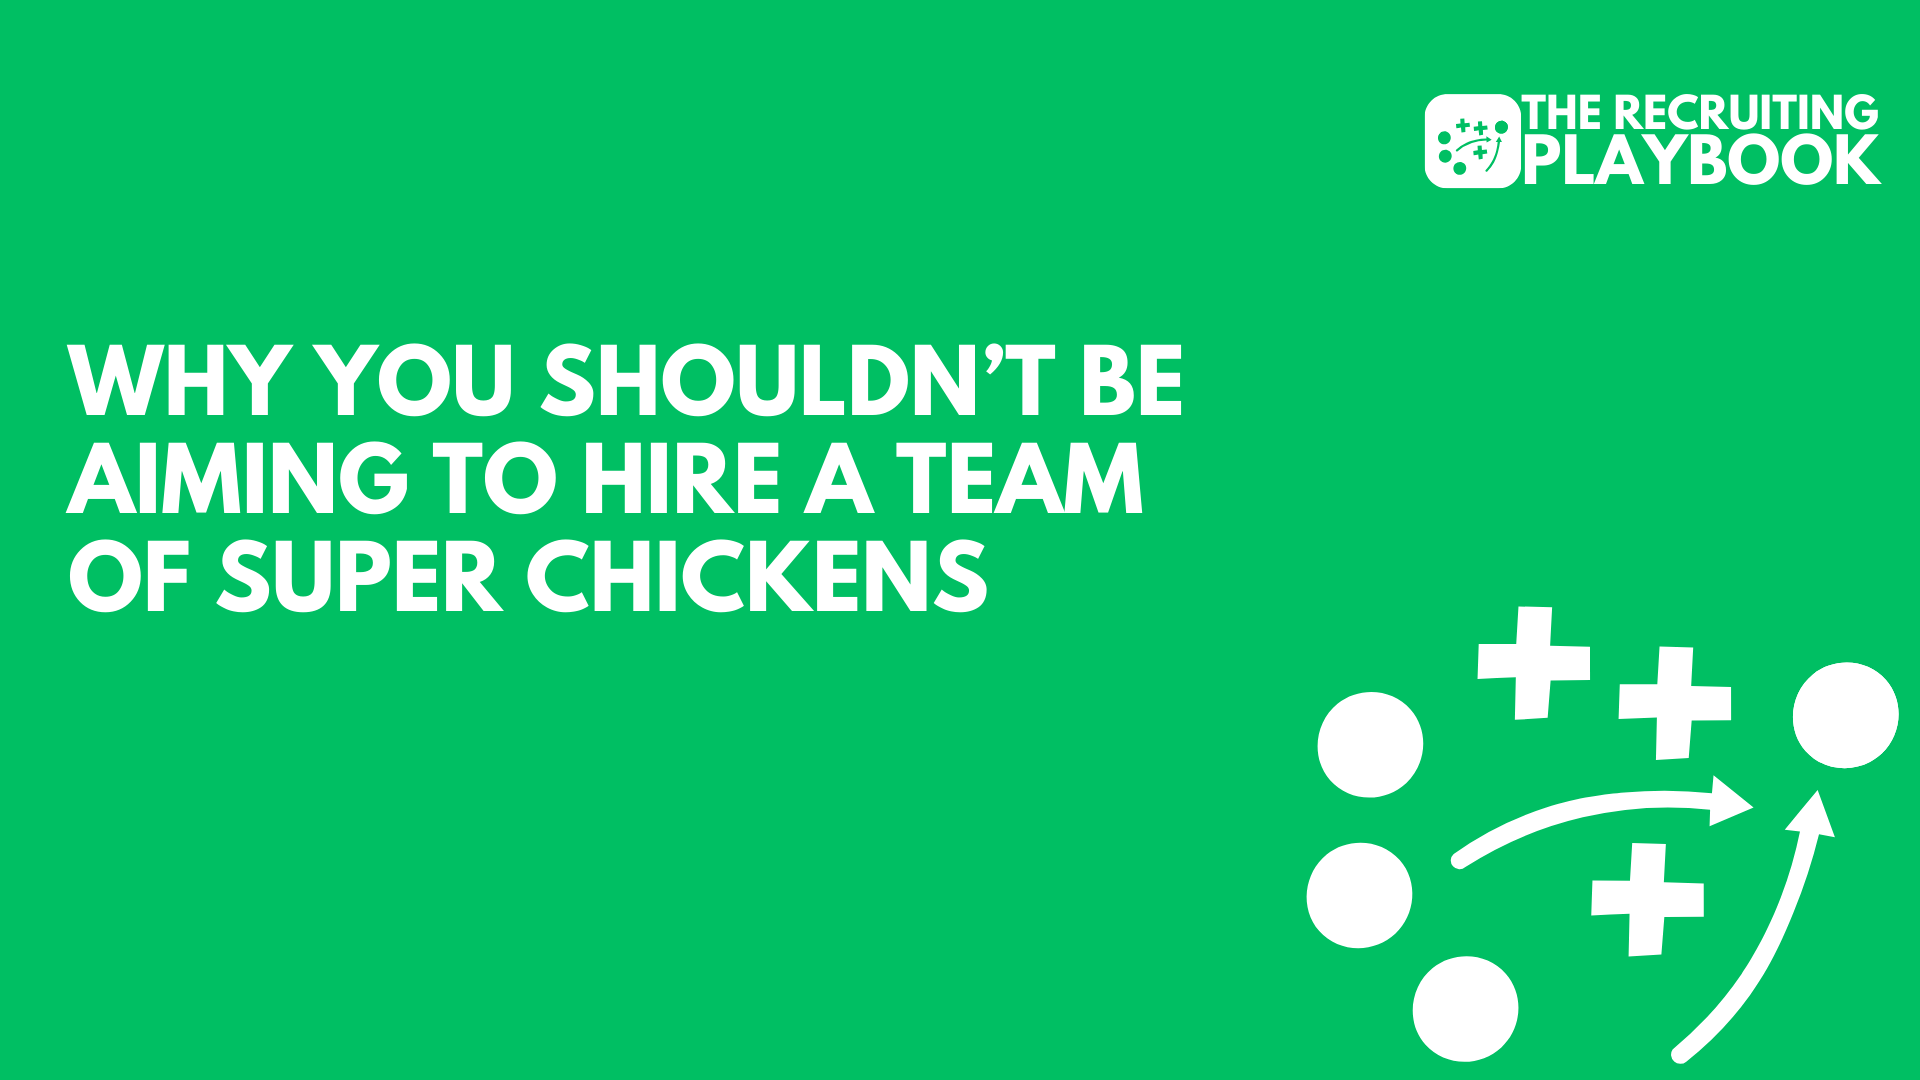 Why You Shouldn’t Be Aiming To Hire a Team Of Super Chickens